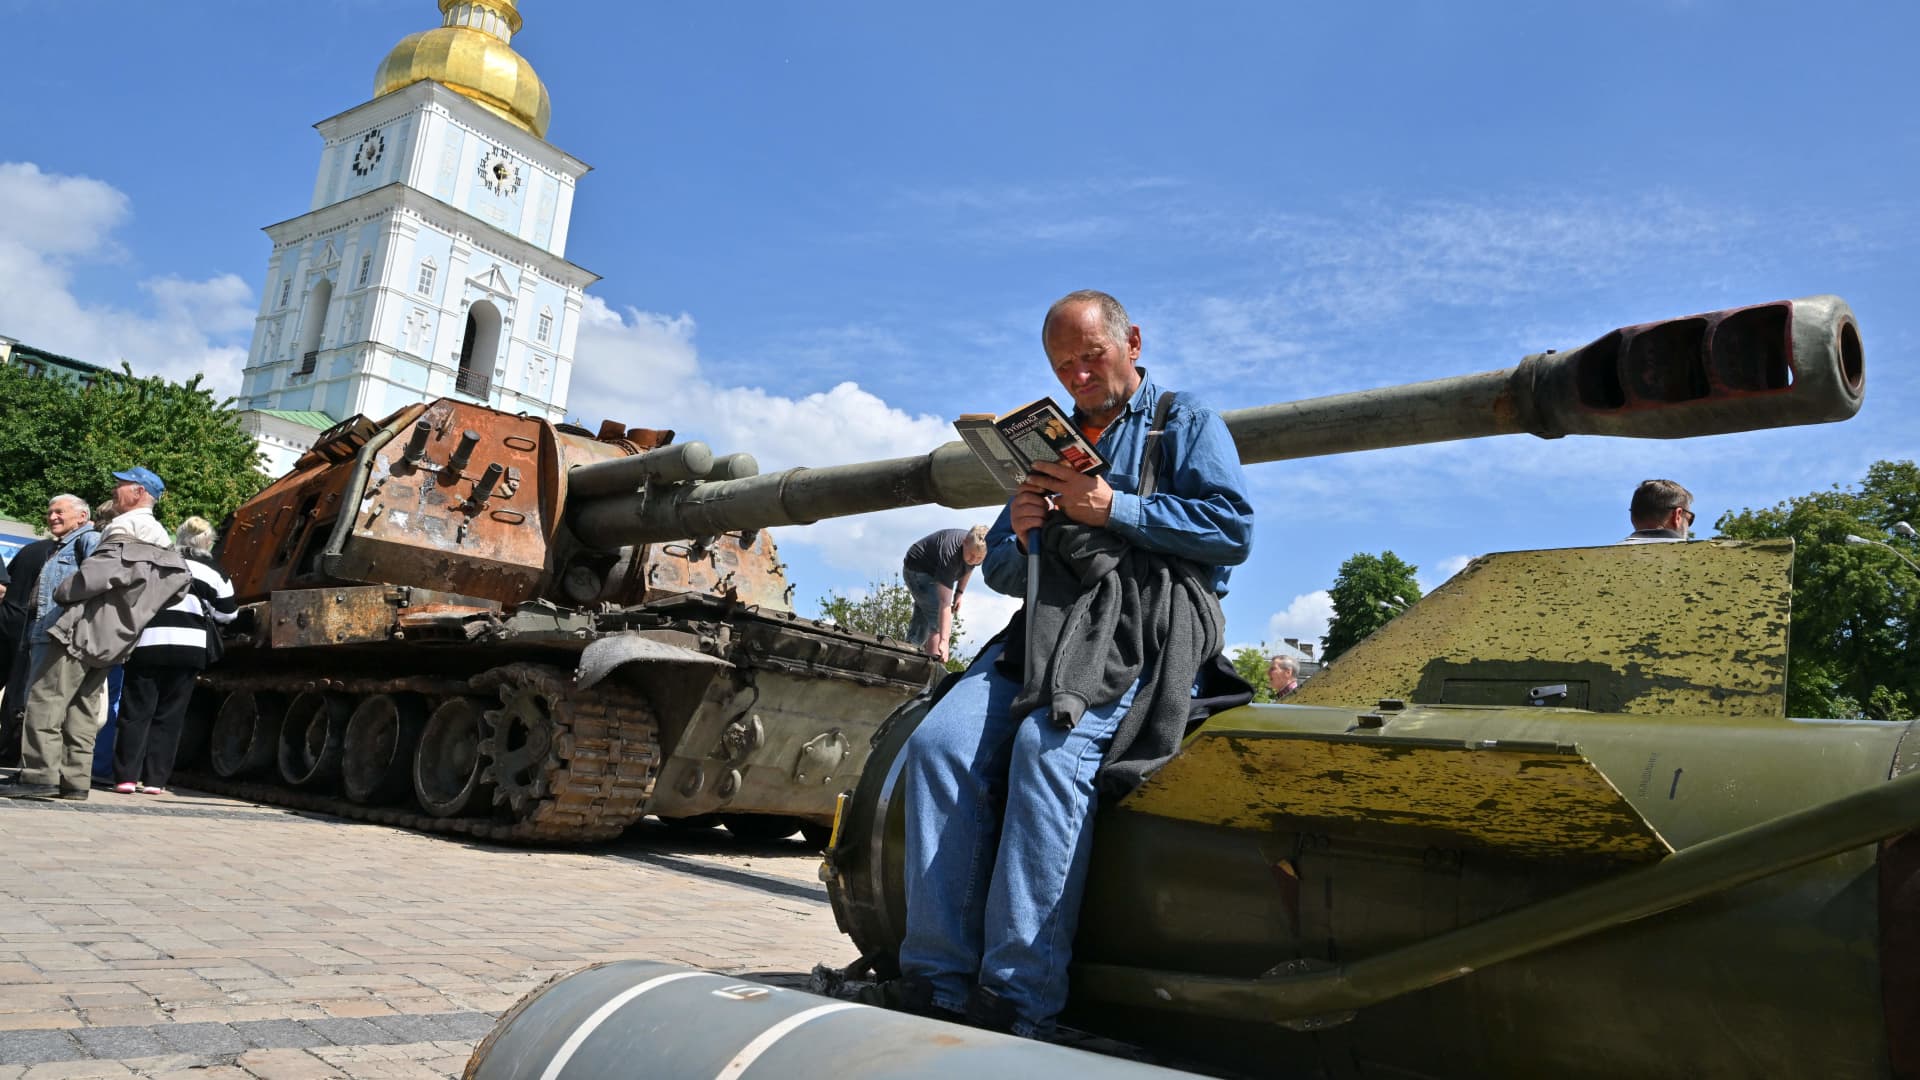 An elderly man reads a book as sits on a fragment of Russian rocket Tochka-U at open air exposition of destroyed Russian equipment in the center of Kyiv on June 1, 2022 amid the Russian invasion of Ukraine.